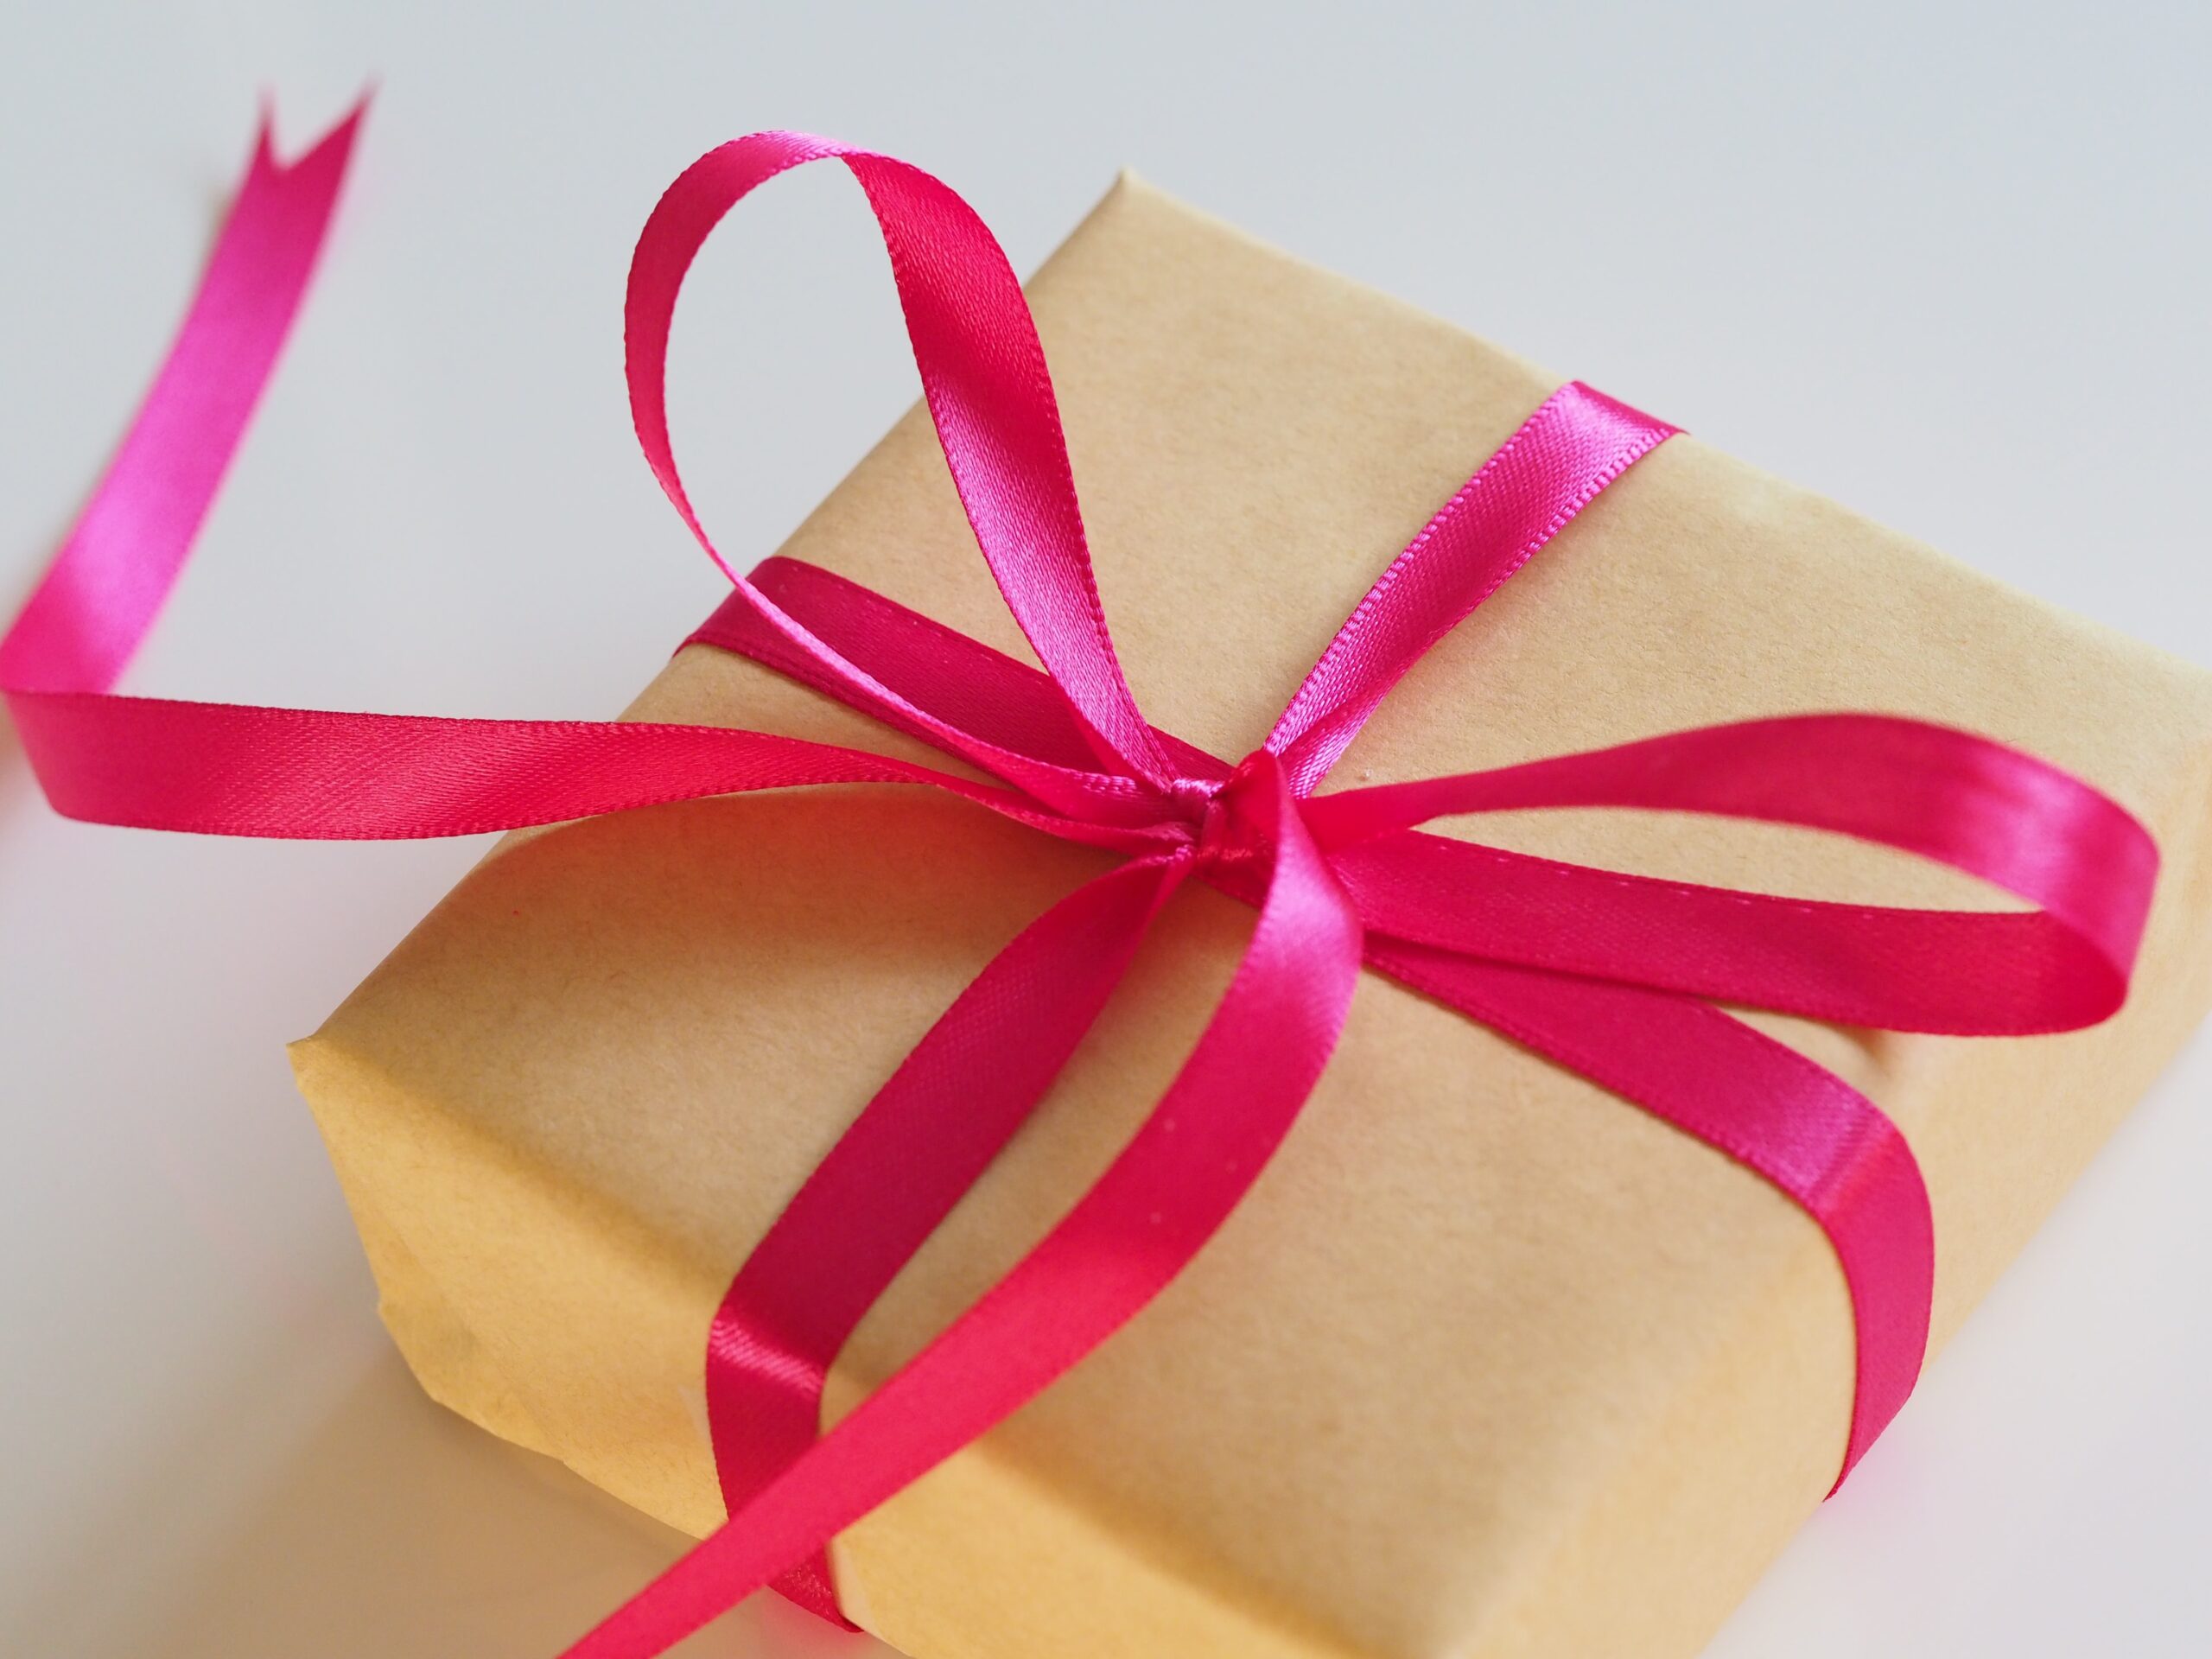 Consider the tax consequences before making gifts to loved ones